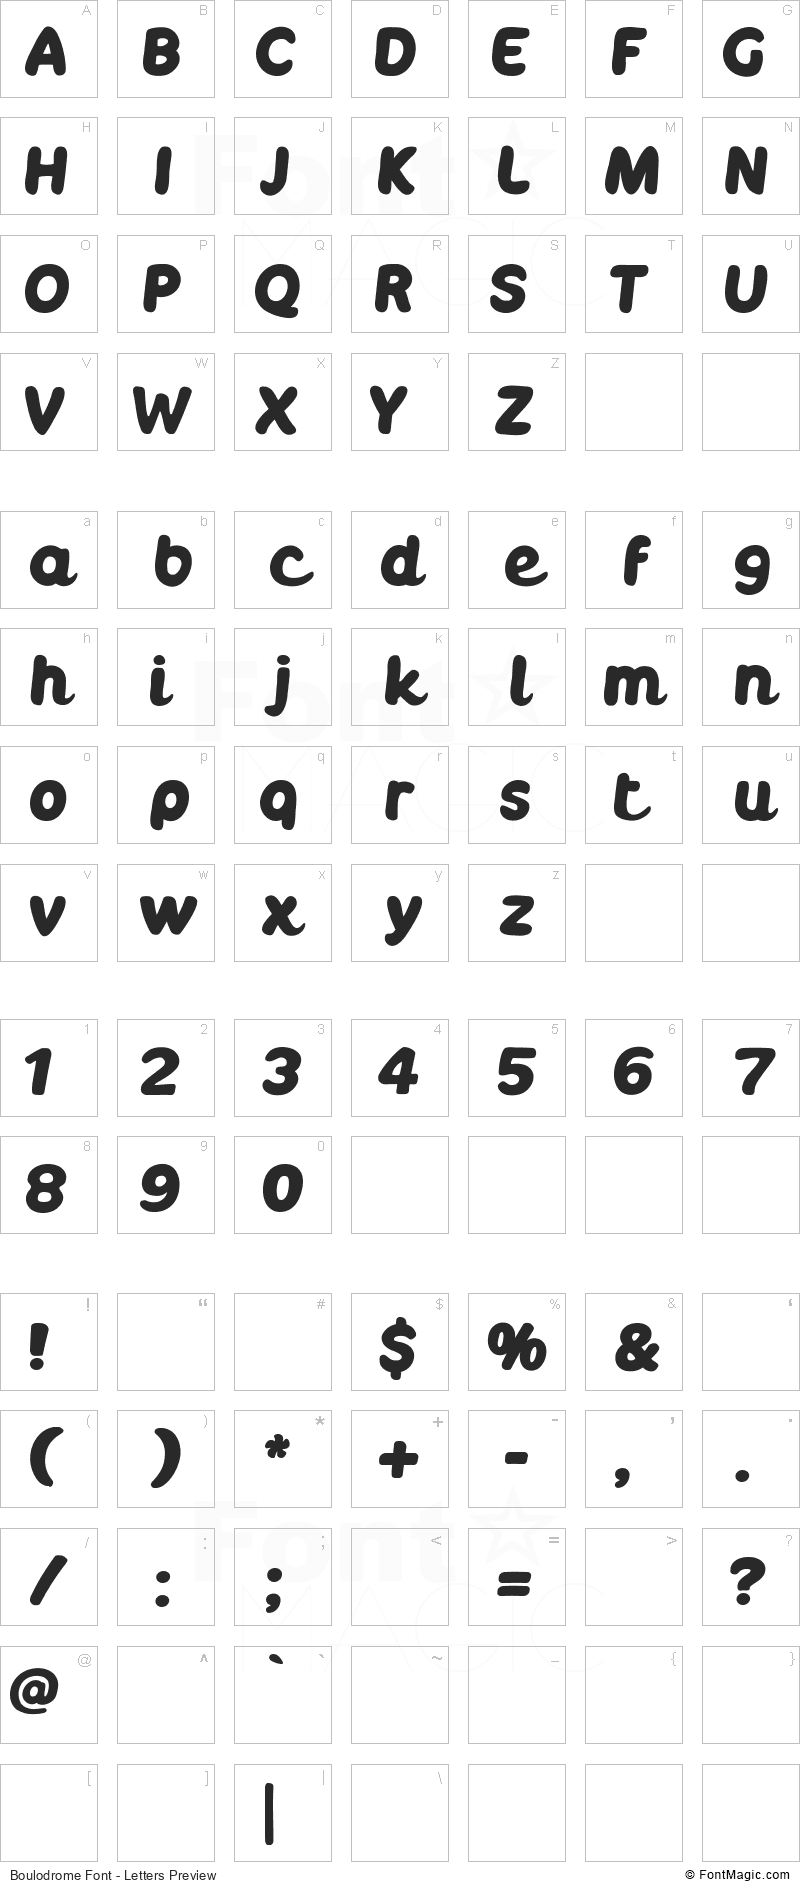 Boulodrome Font - All Latters Preview Chart